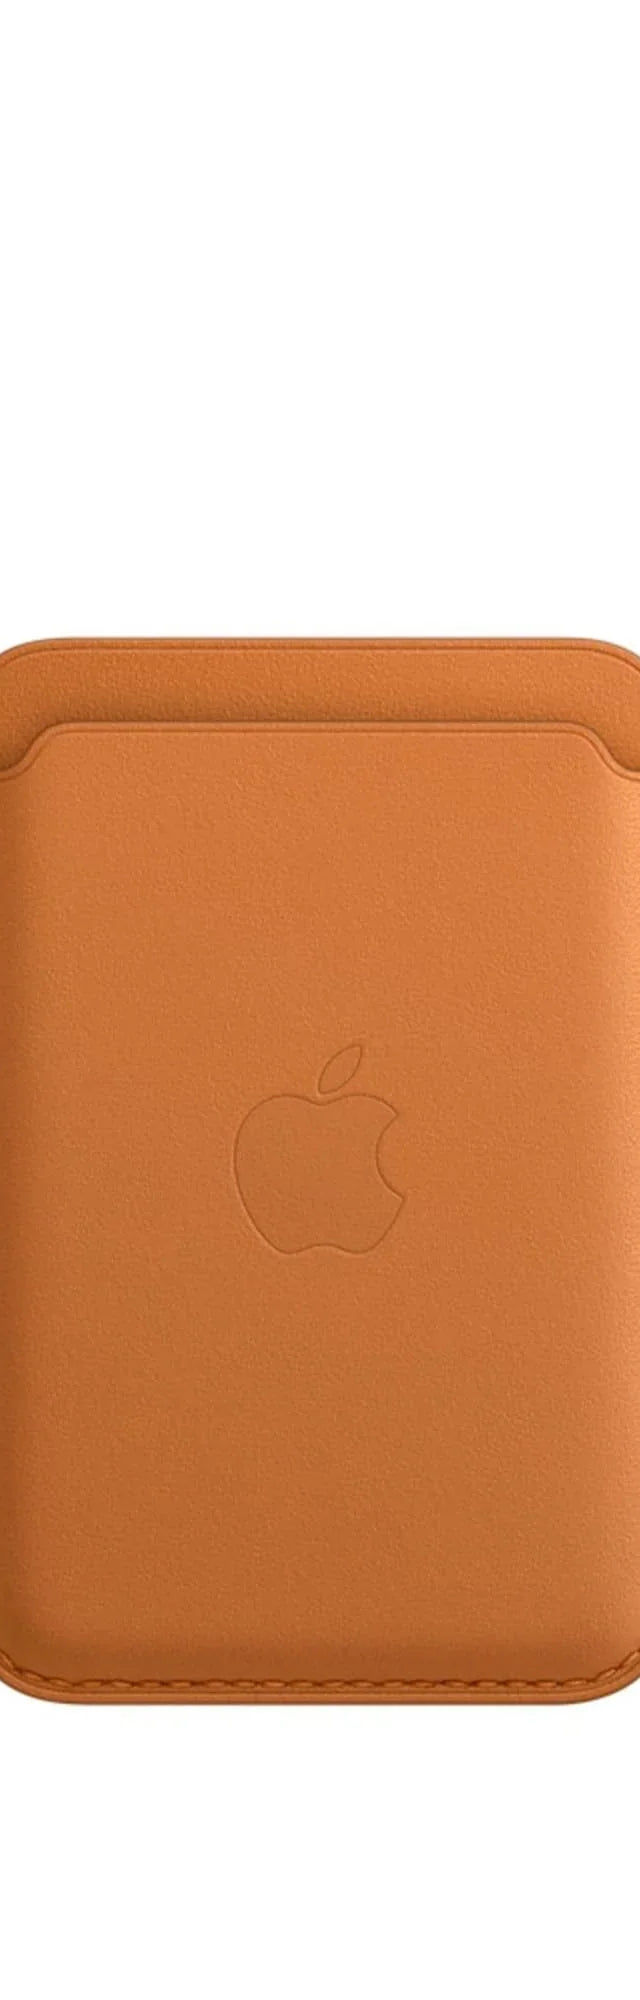 iphone leather wallet with magsafe golden brown